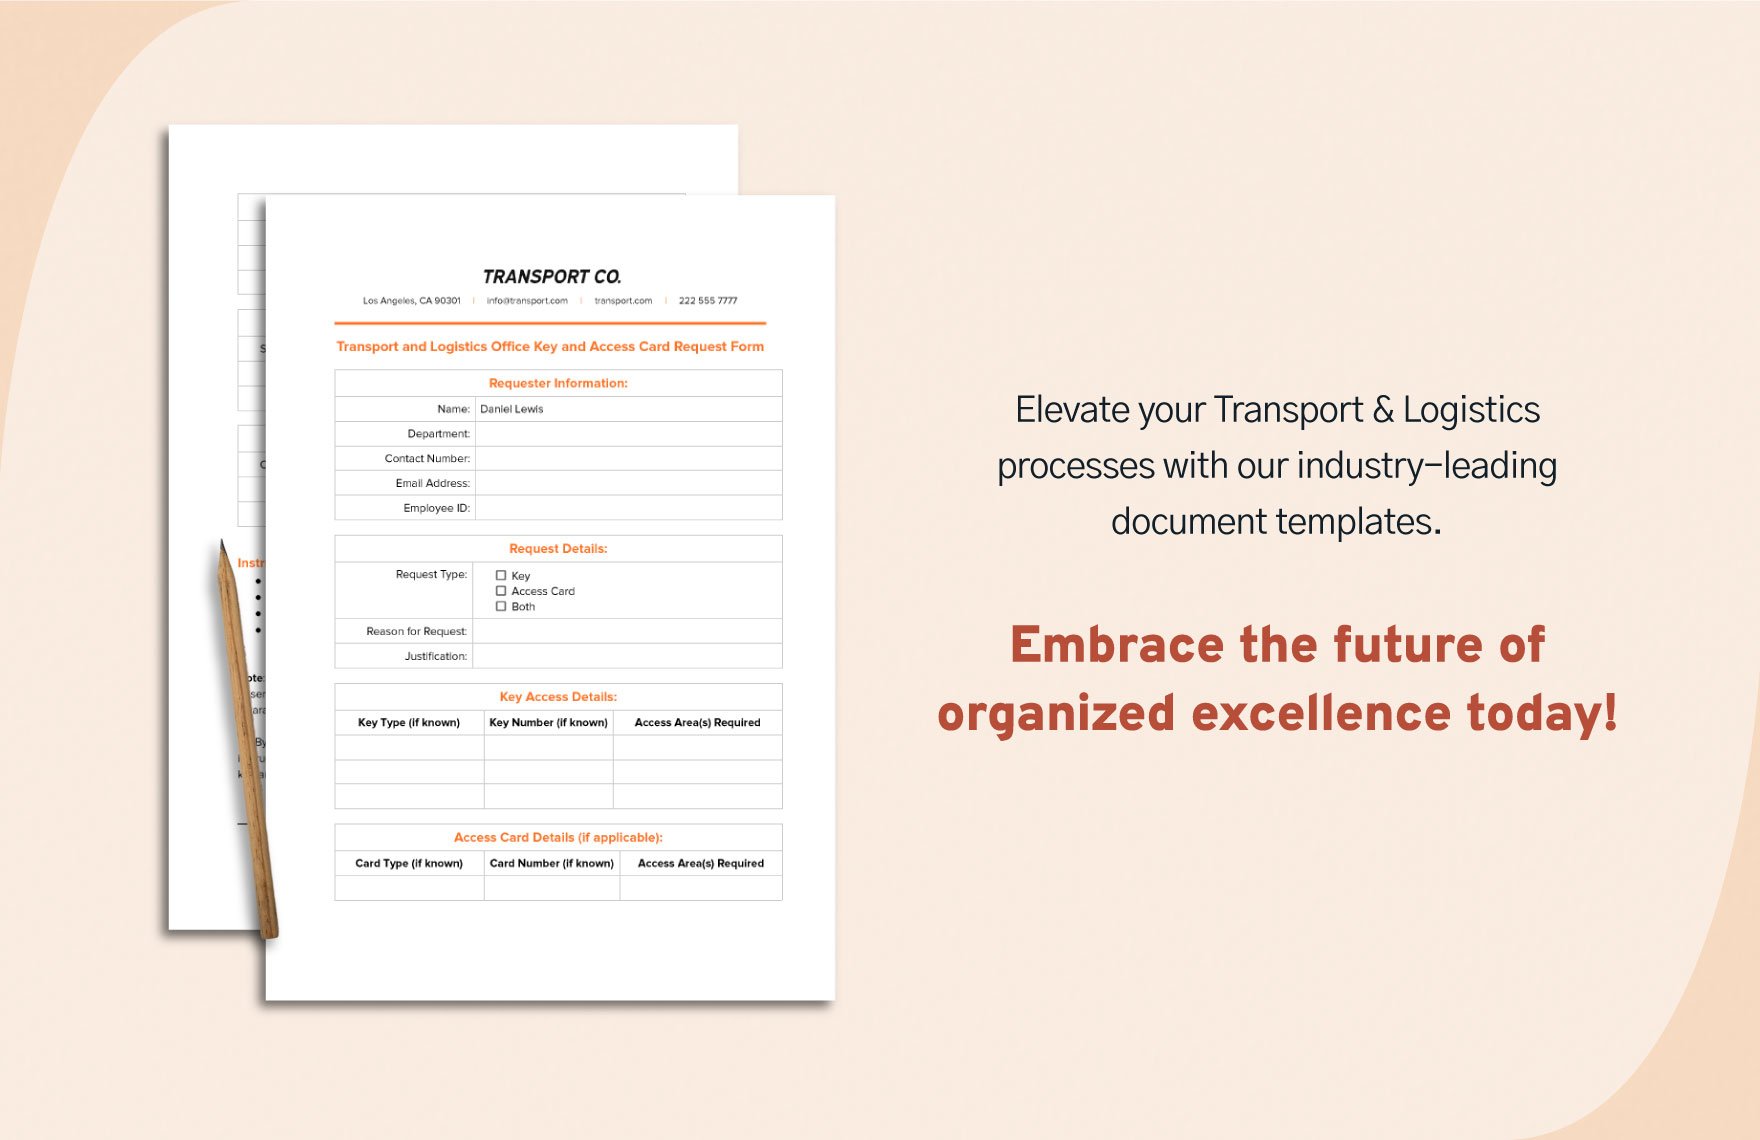 Transport and Logistics Office Key and Access Card Request Form Template